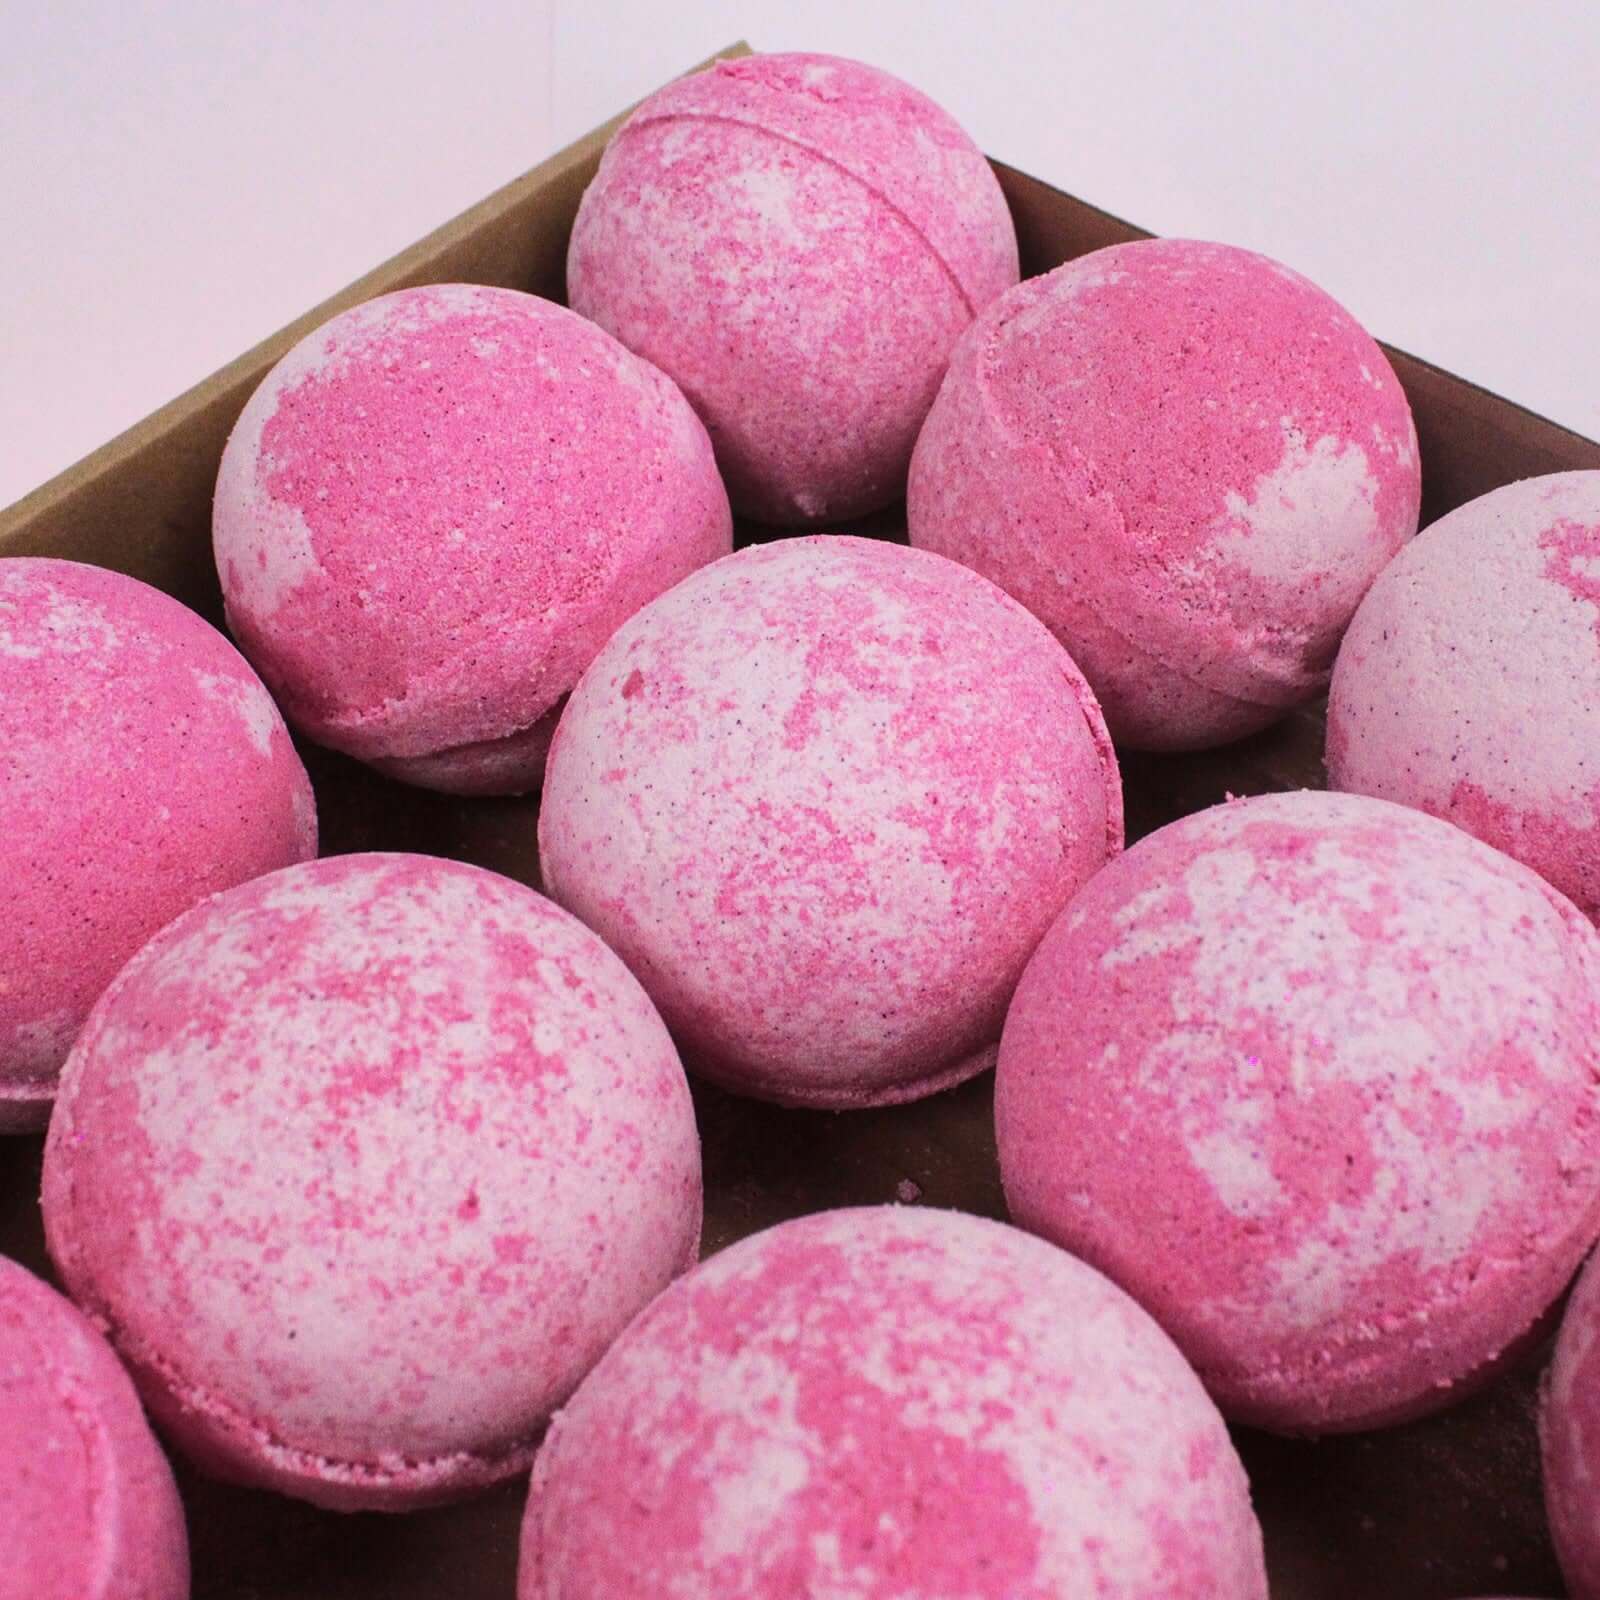 A collection of The Soap Gals Bubblegum Bath Bombs, with a sweet edible smelling accord, arranged neatly in a box.